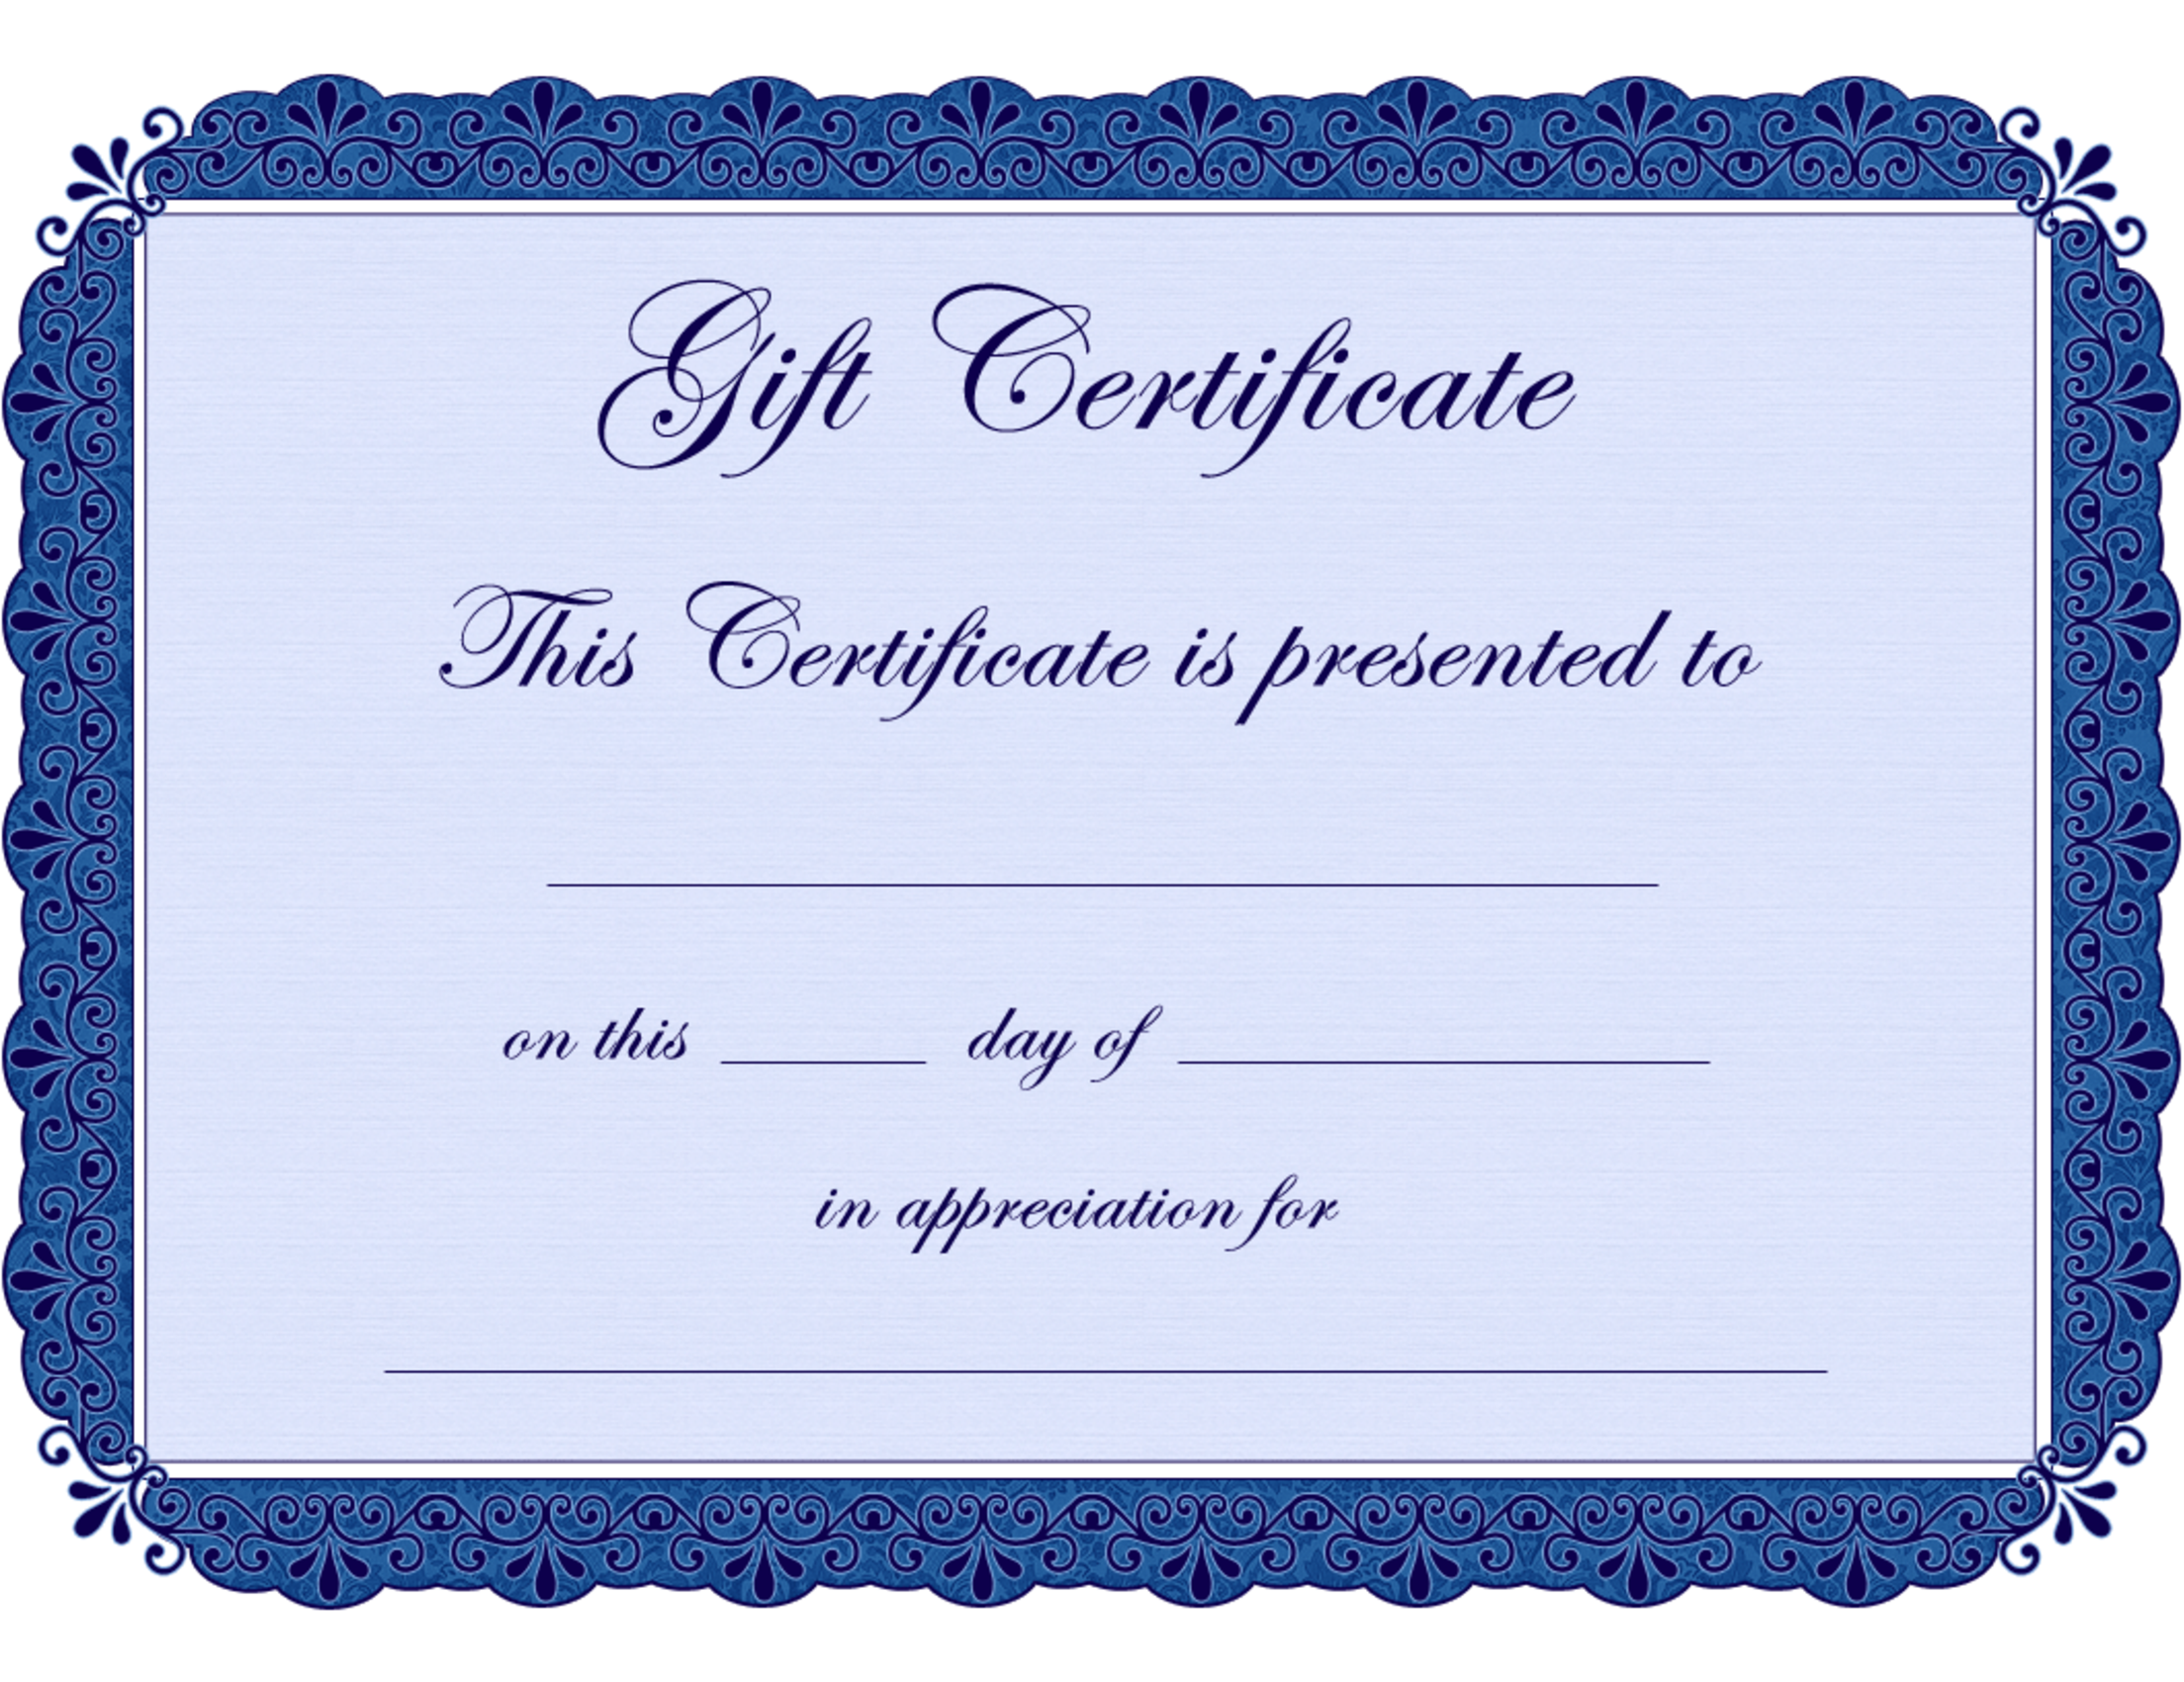 clipart gift certificate border - photo #9